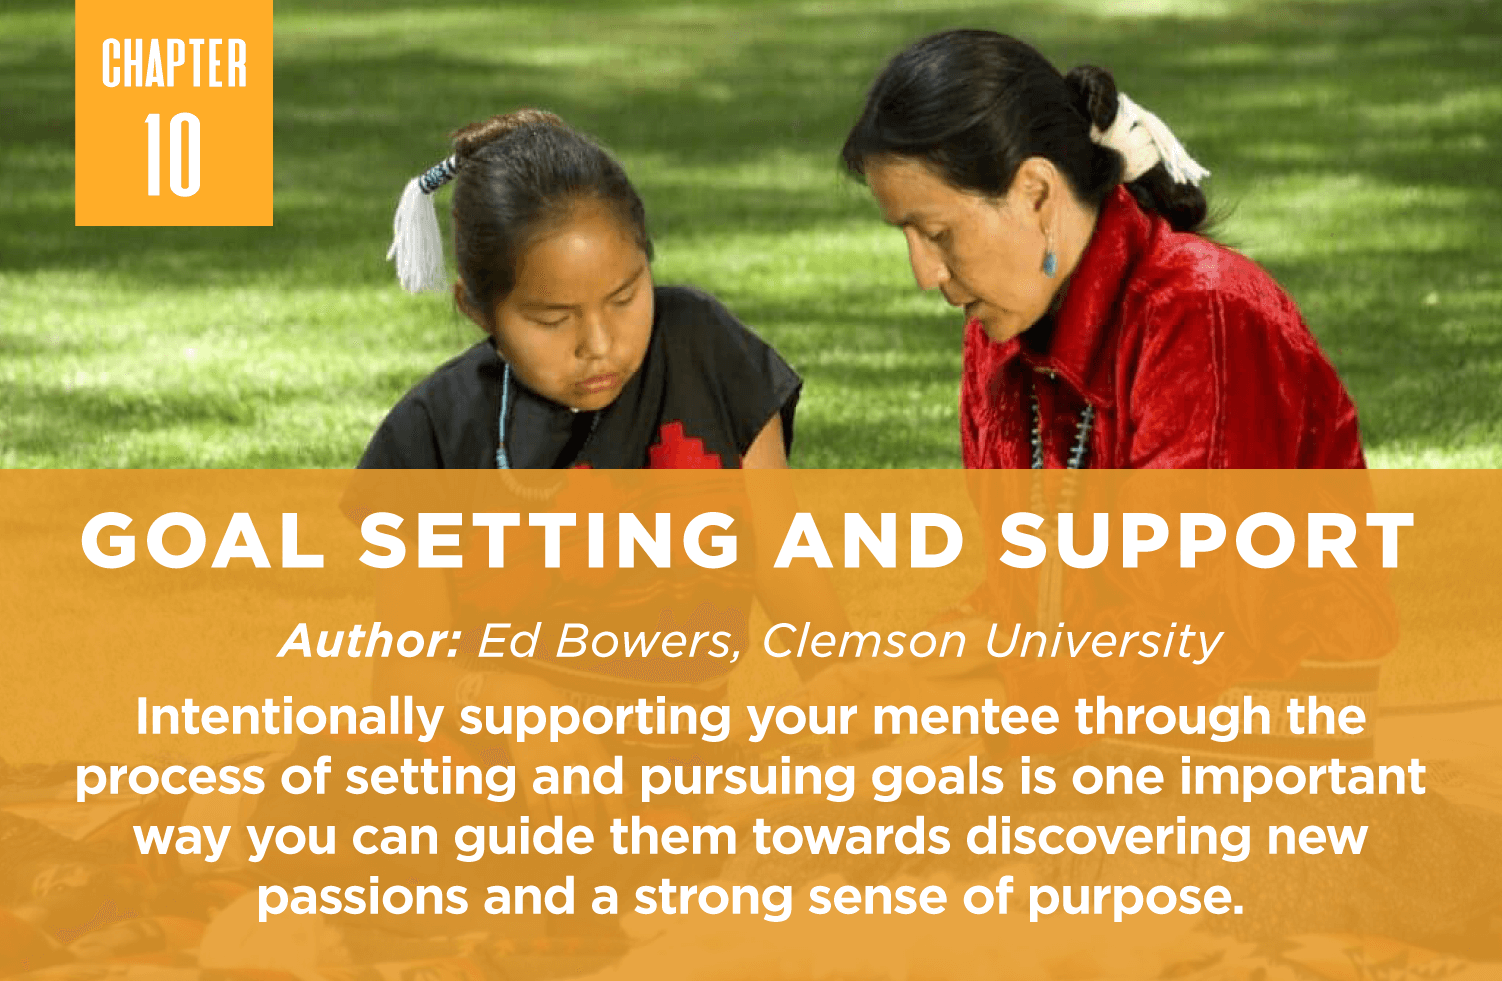 Goal Setting and Support
Author: Ed Bowers, Clemson University
Intentionally supporting your mentee through the process of setting and pursuing goals is one important way you can guide them towards discovering new passions and a strong sense of purpose.